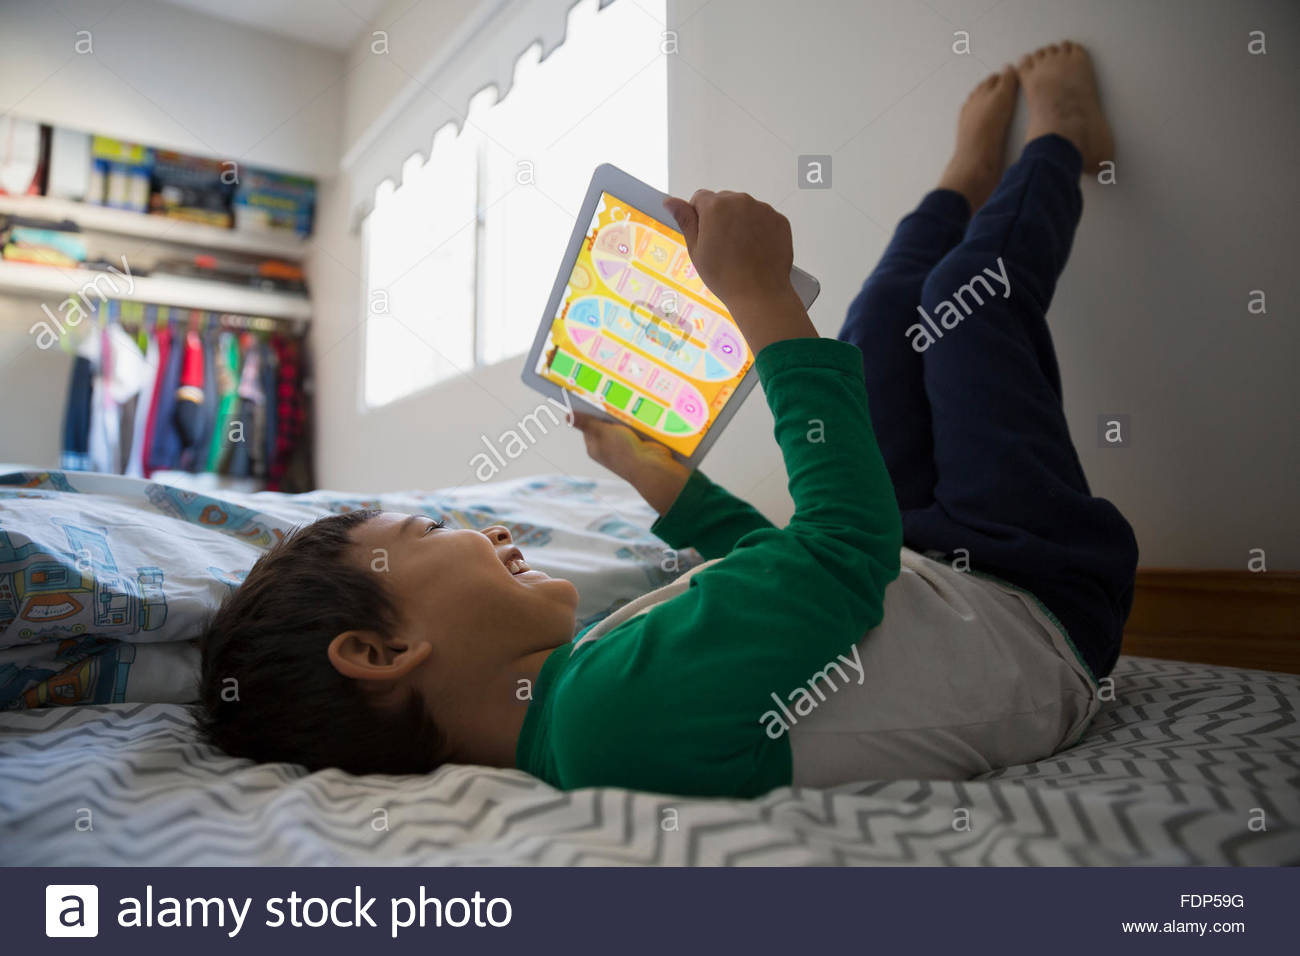 Boy feet up using digital tablet on bed Stock Photo